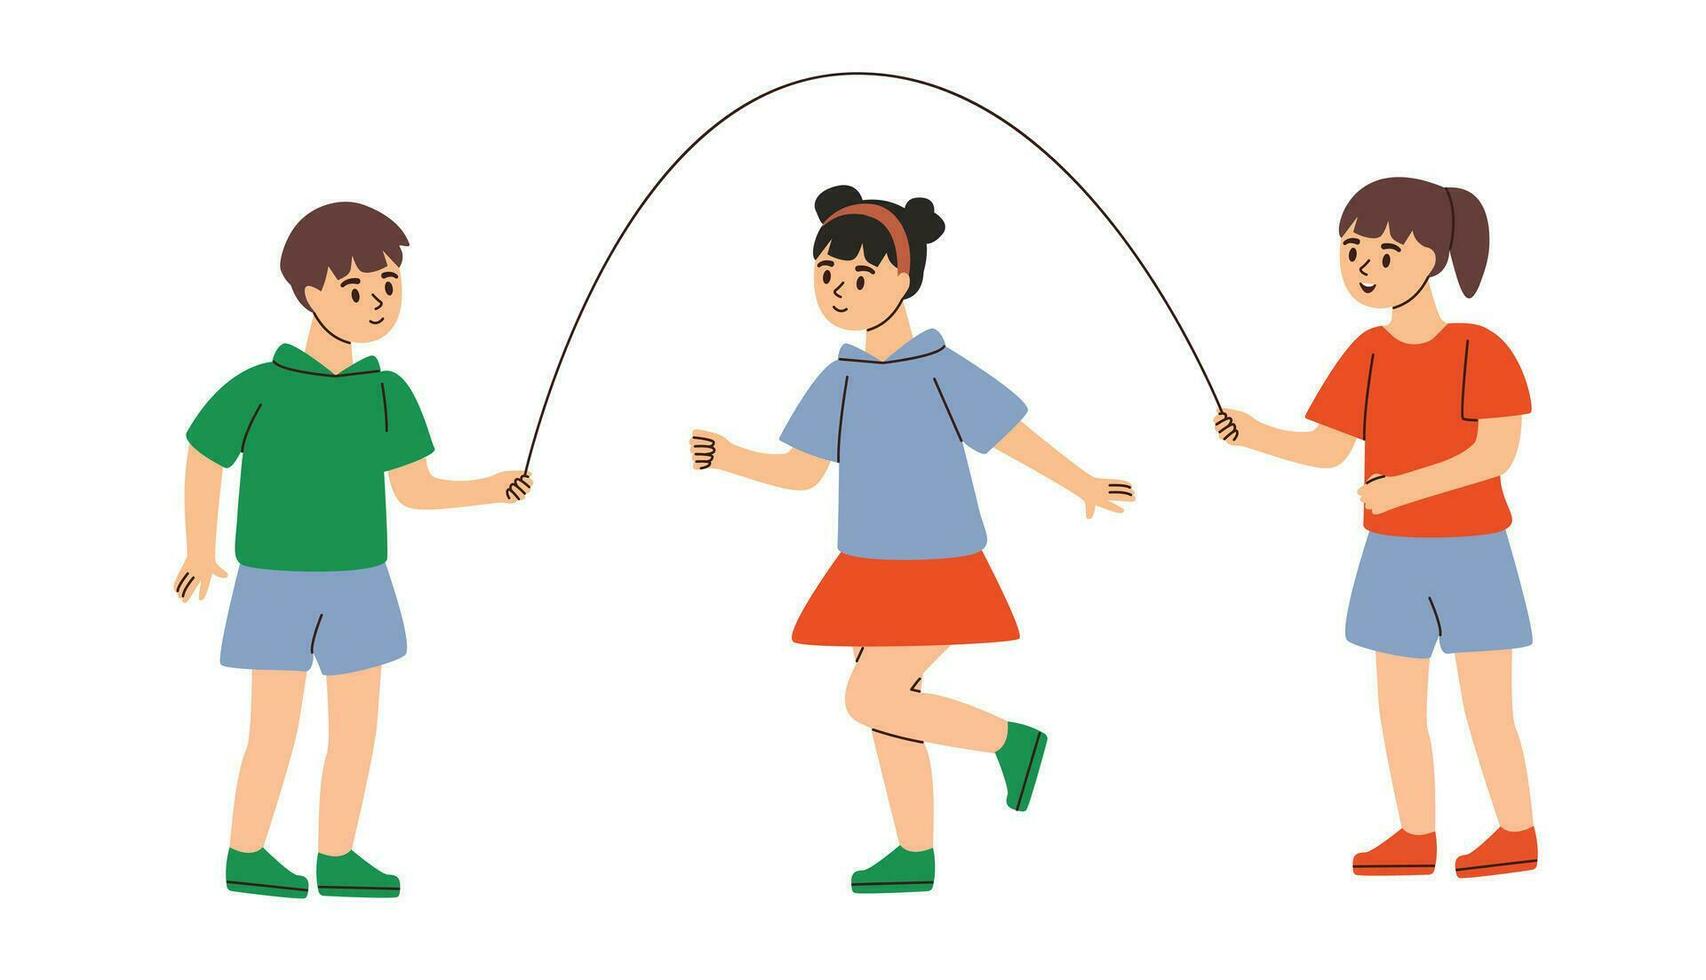 Children jump rope.. Outside kids activities and games, summer outdoor pastime. Flat vector illustration.